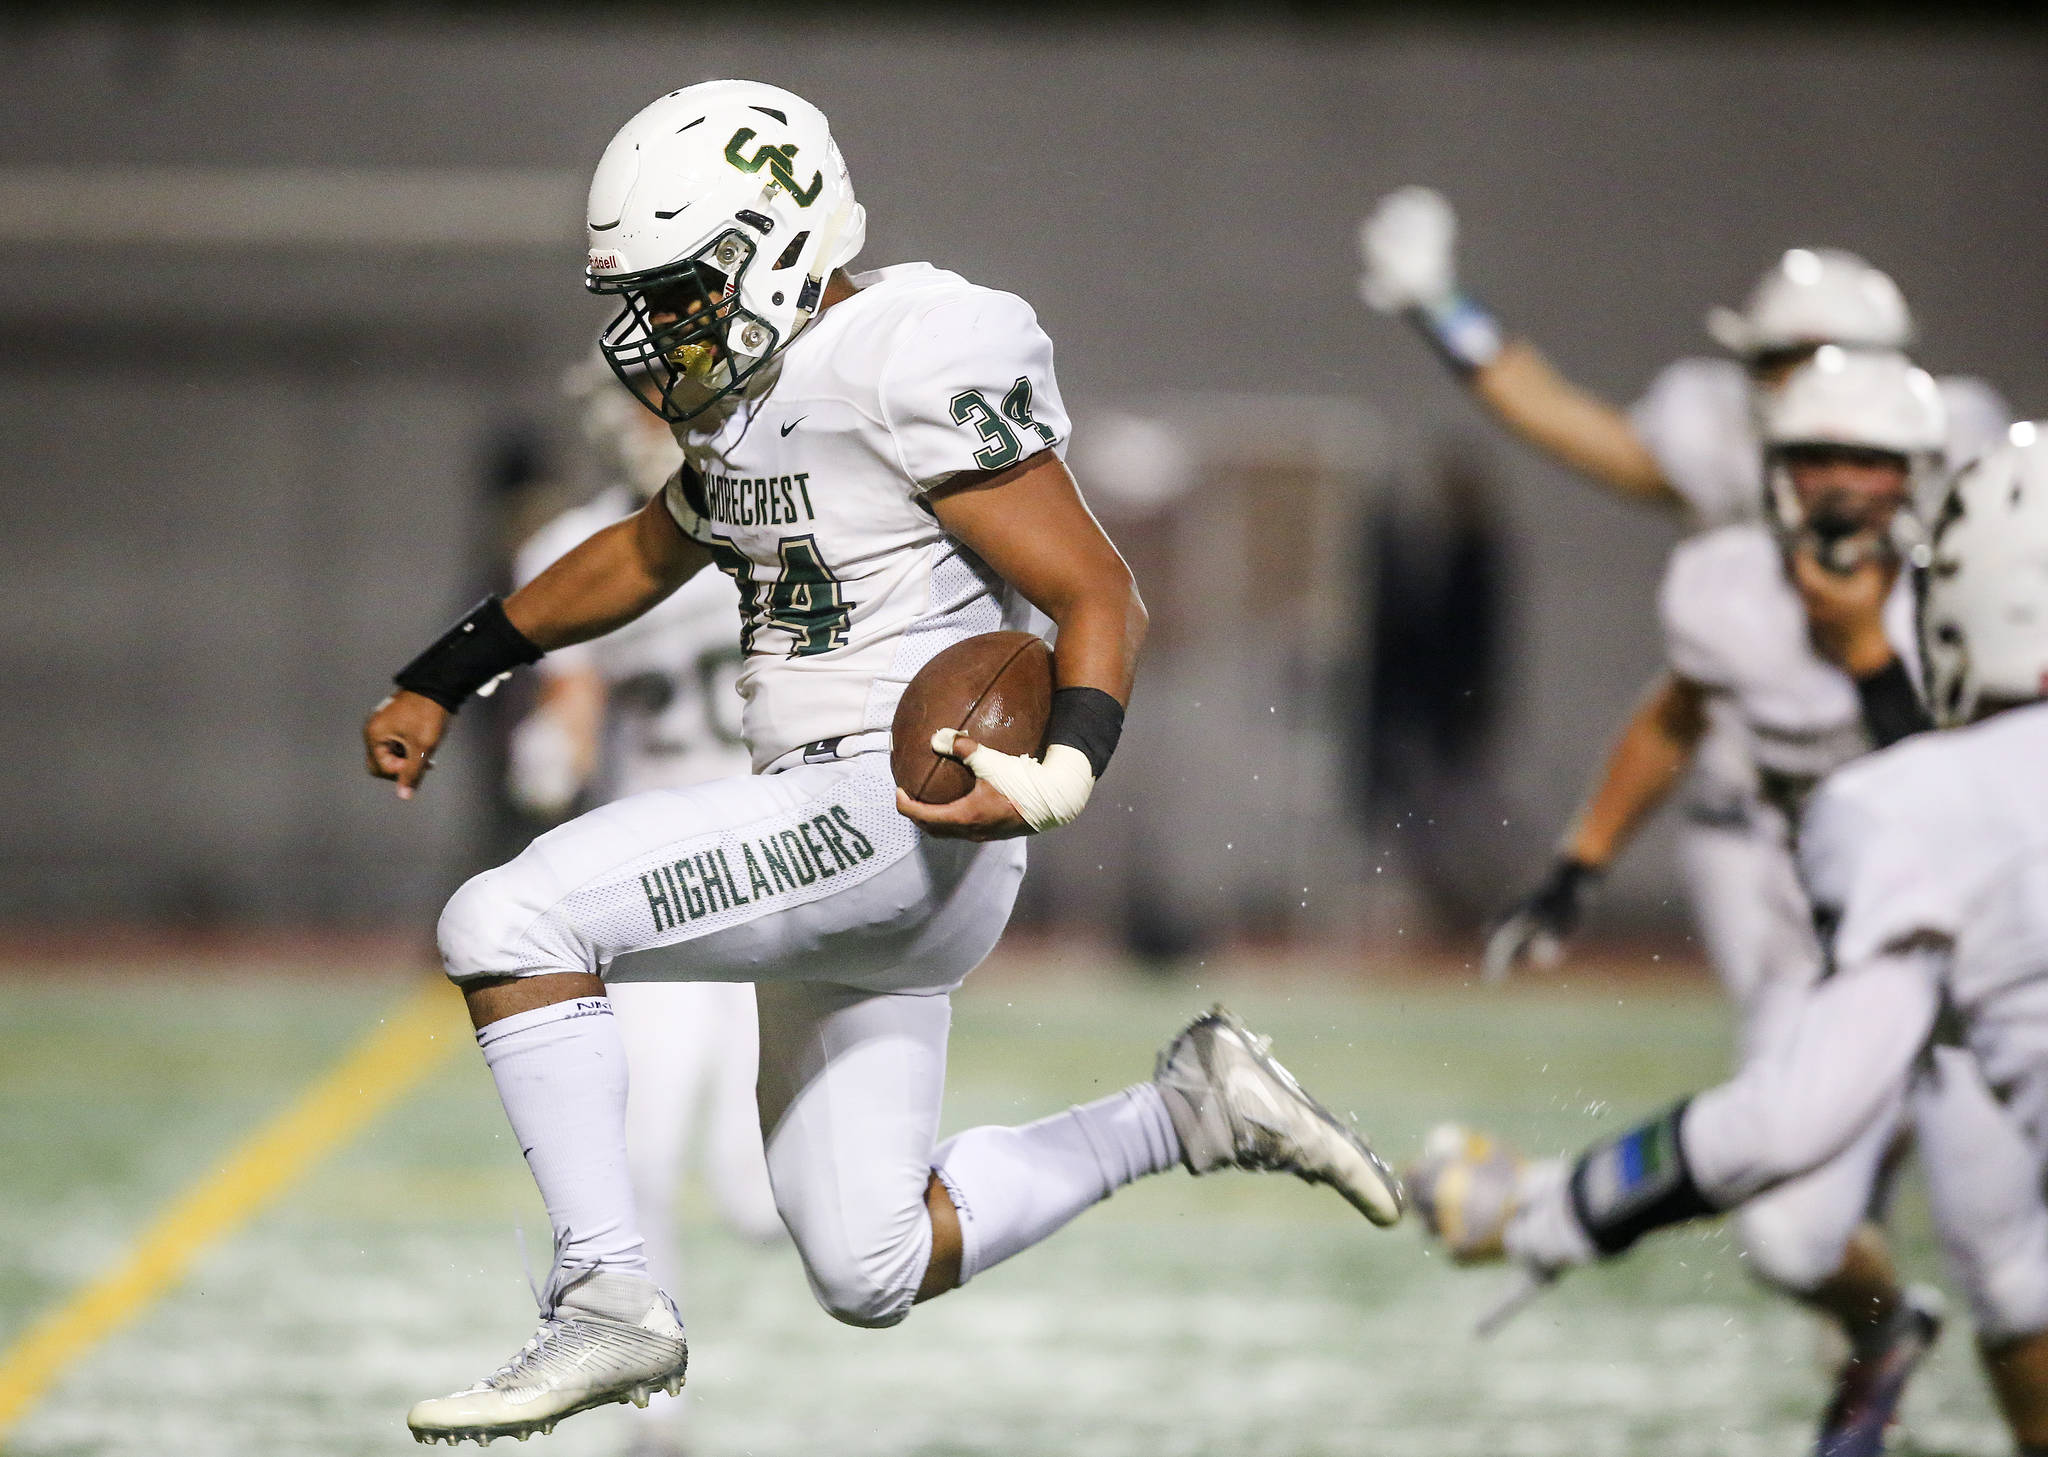 Shorecrest’s Marcus Tidwell leaps into the end zone for the winning 2-point conversion to give the win as beat Snohomish 36-35 on Oct. 4, 2019, at Veterans Stadium at Snohomish High School. (Andy Bronson / The Herald)